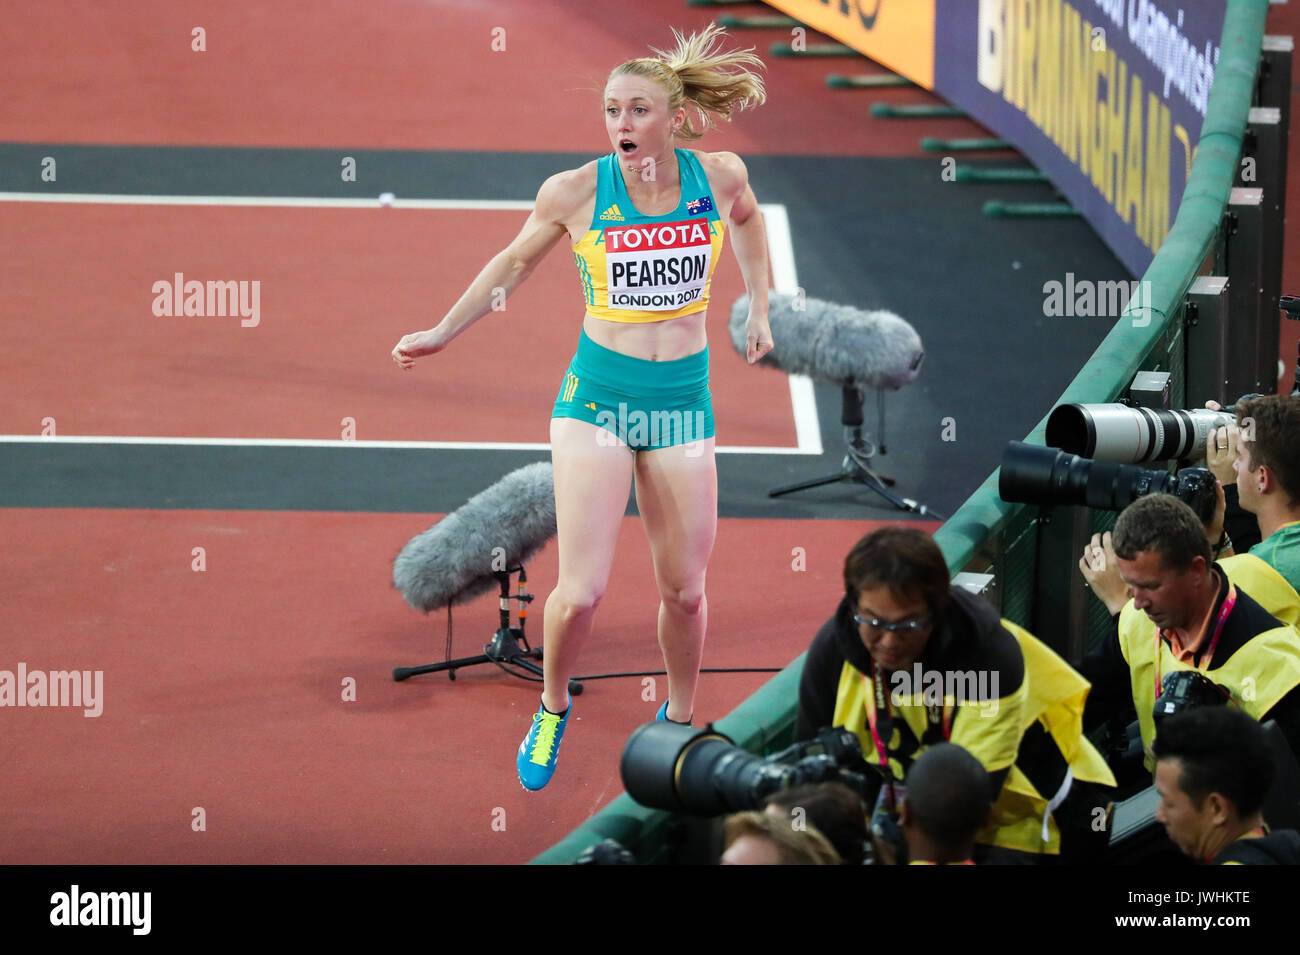 London, UK. 12th Aug, 2017.  Sally Pearson, Australia, after winning the women's 100m hurdles final on day nine of the IAAF London 2017 world Championships at the London Stadium. Credit: Paul Davey/Alamy Live News Stock Photo